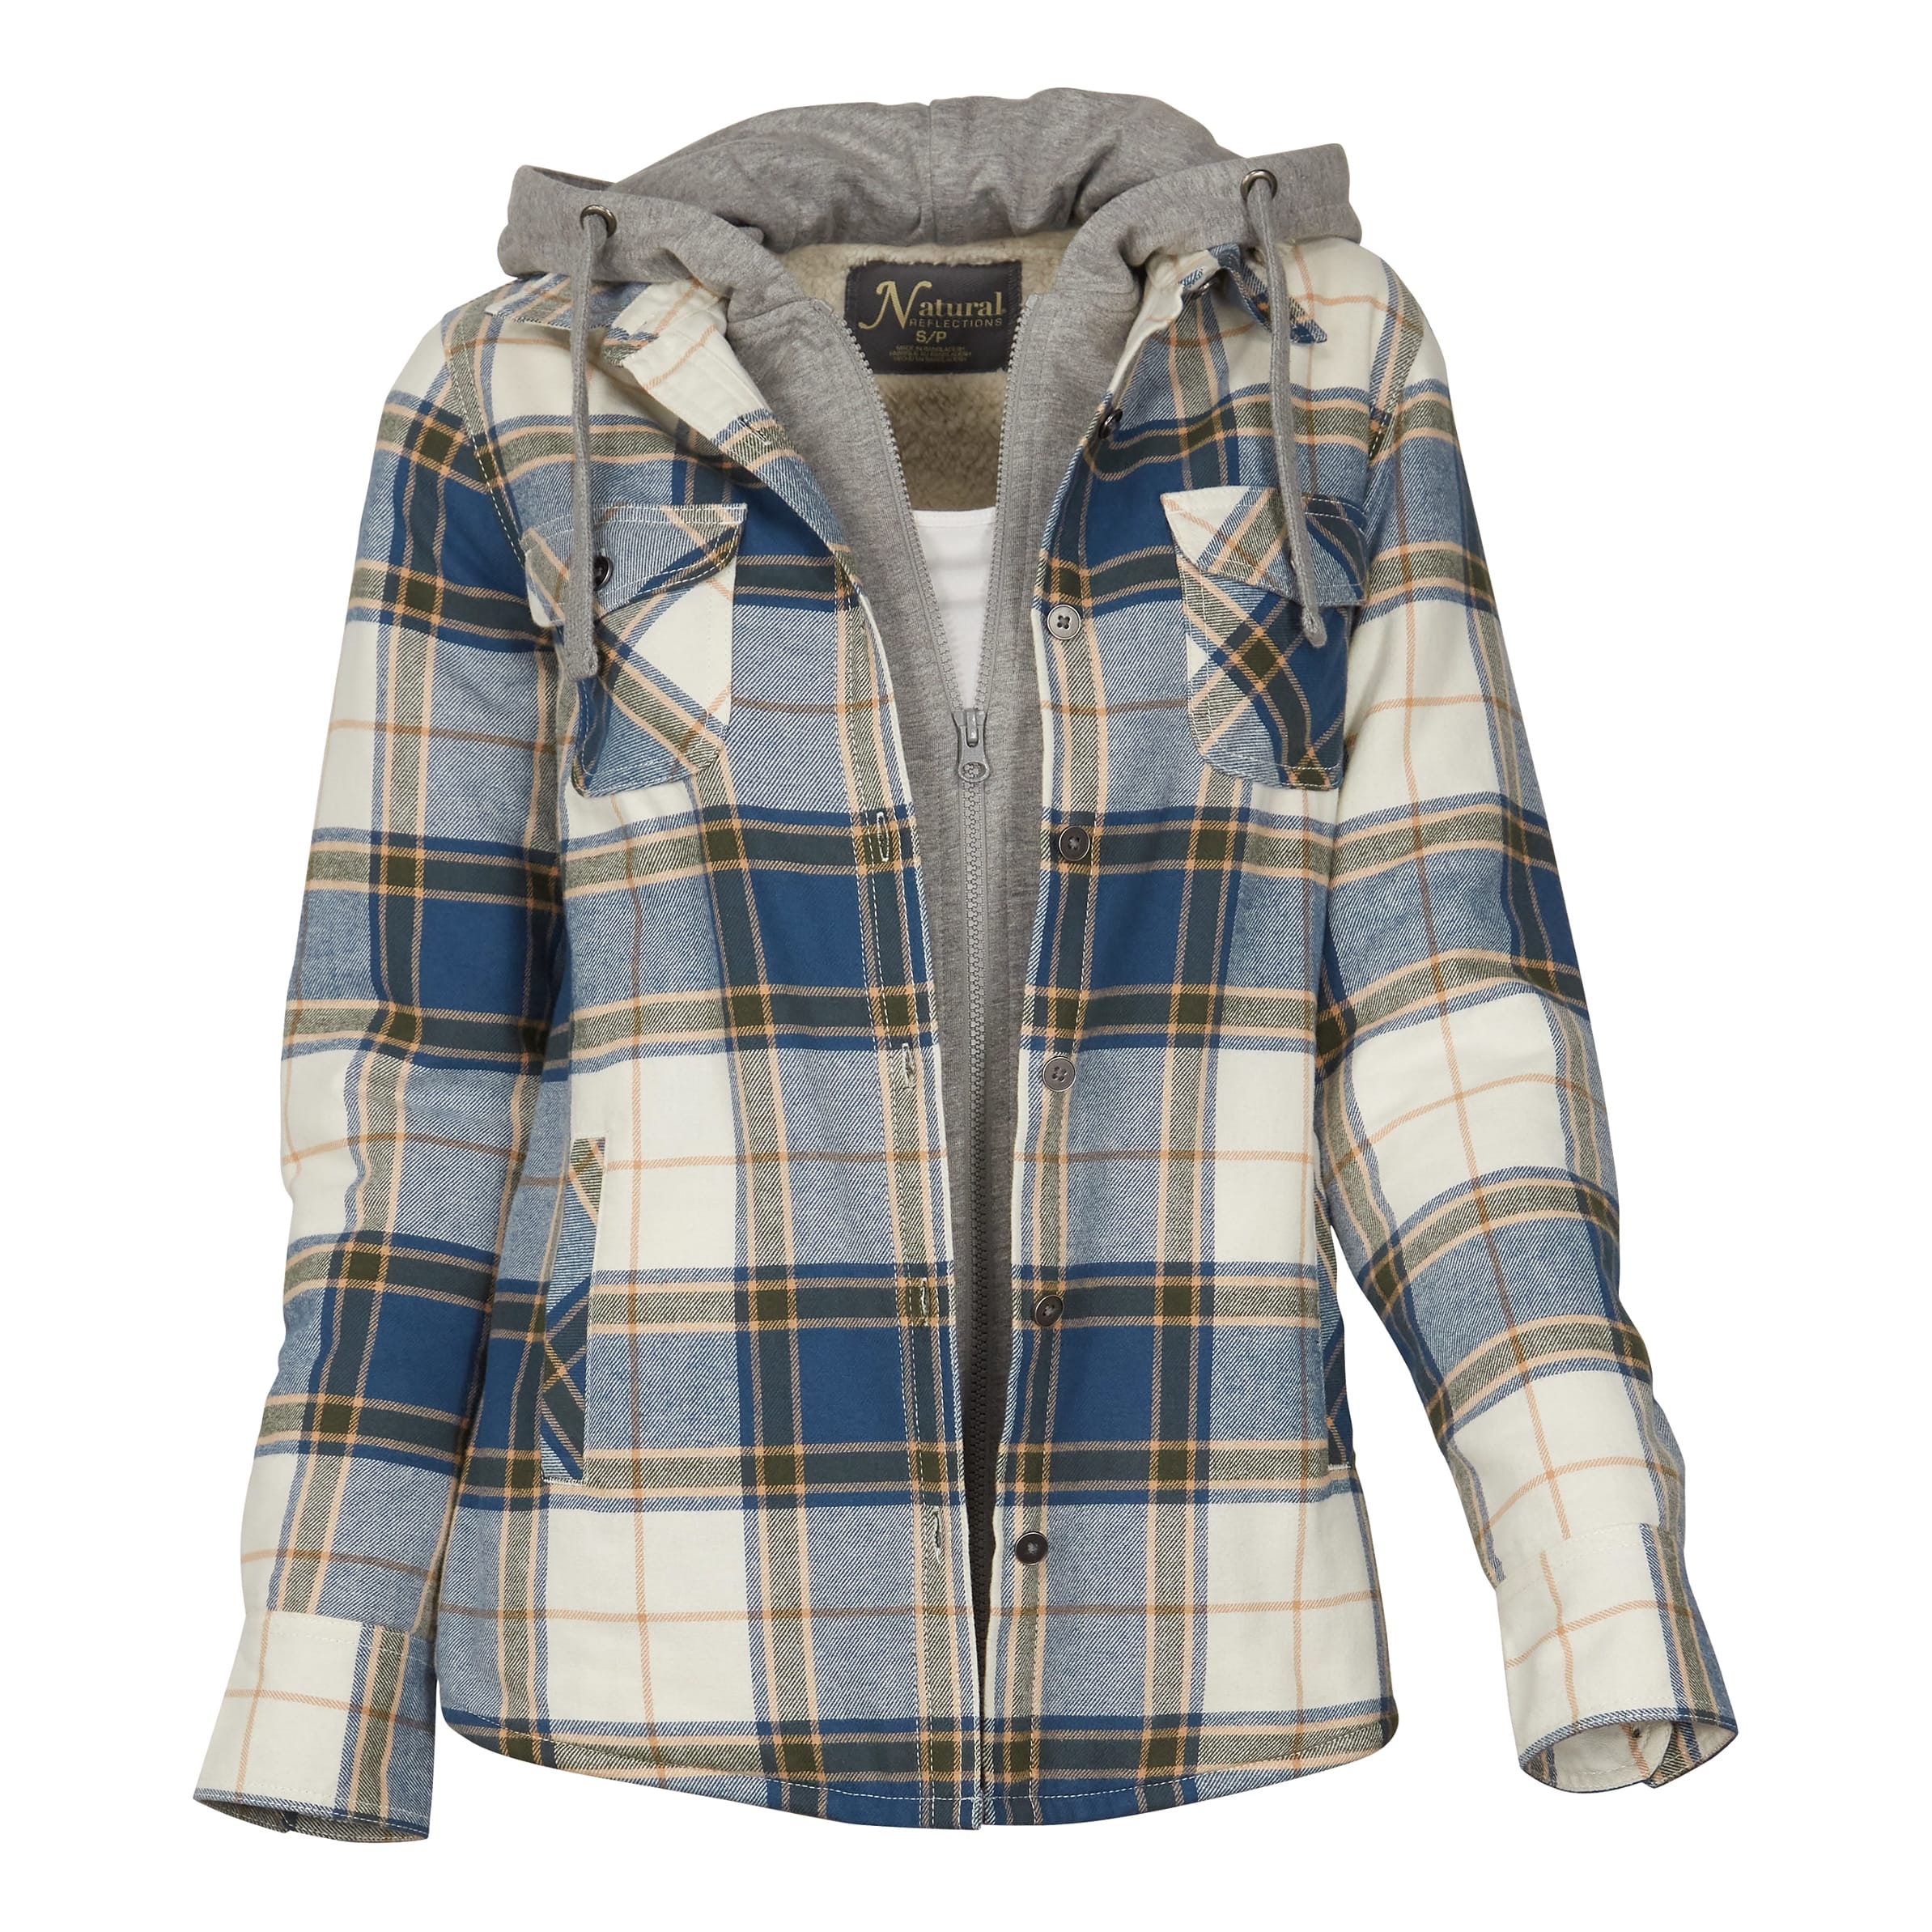 Wrangler Hooded Flannel Work Jacket For Men Cabela's | Mens Warm Quilted  Lined Cotton Jackets With Hood Button Down Zipper Long Sleeve Plaid Jackets  